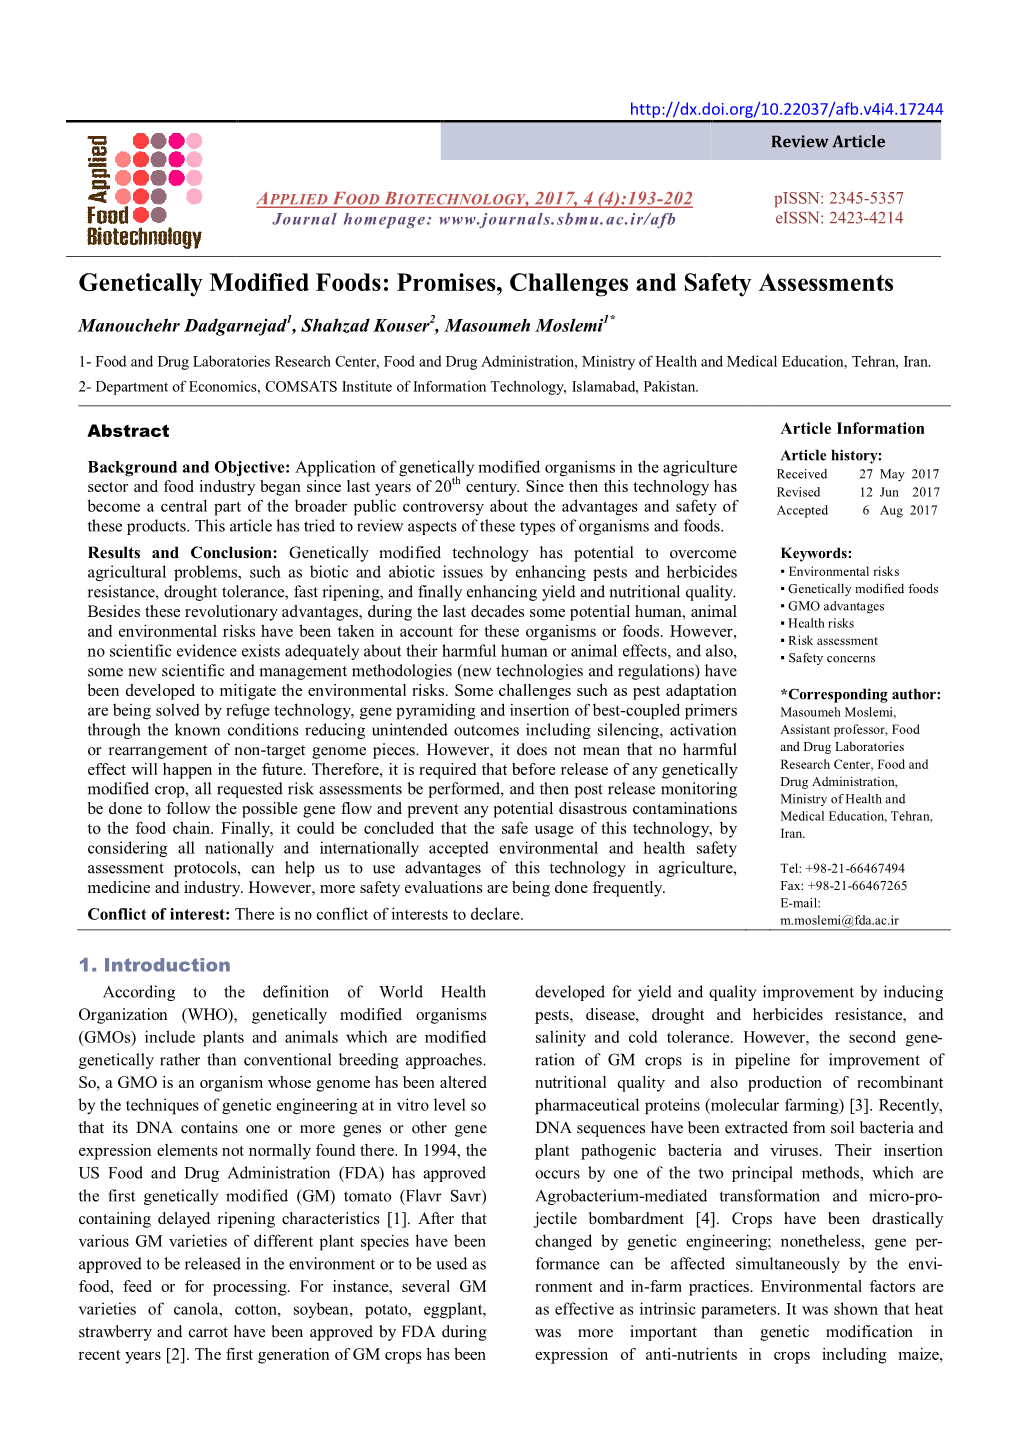 Genetically Modified Foods: Promises, Challenges and Safety Assessments